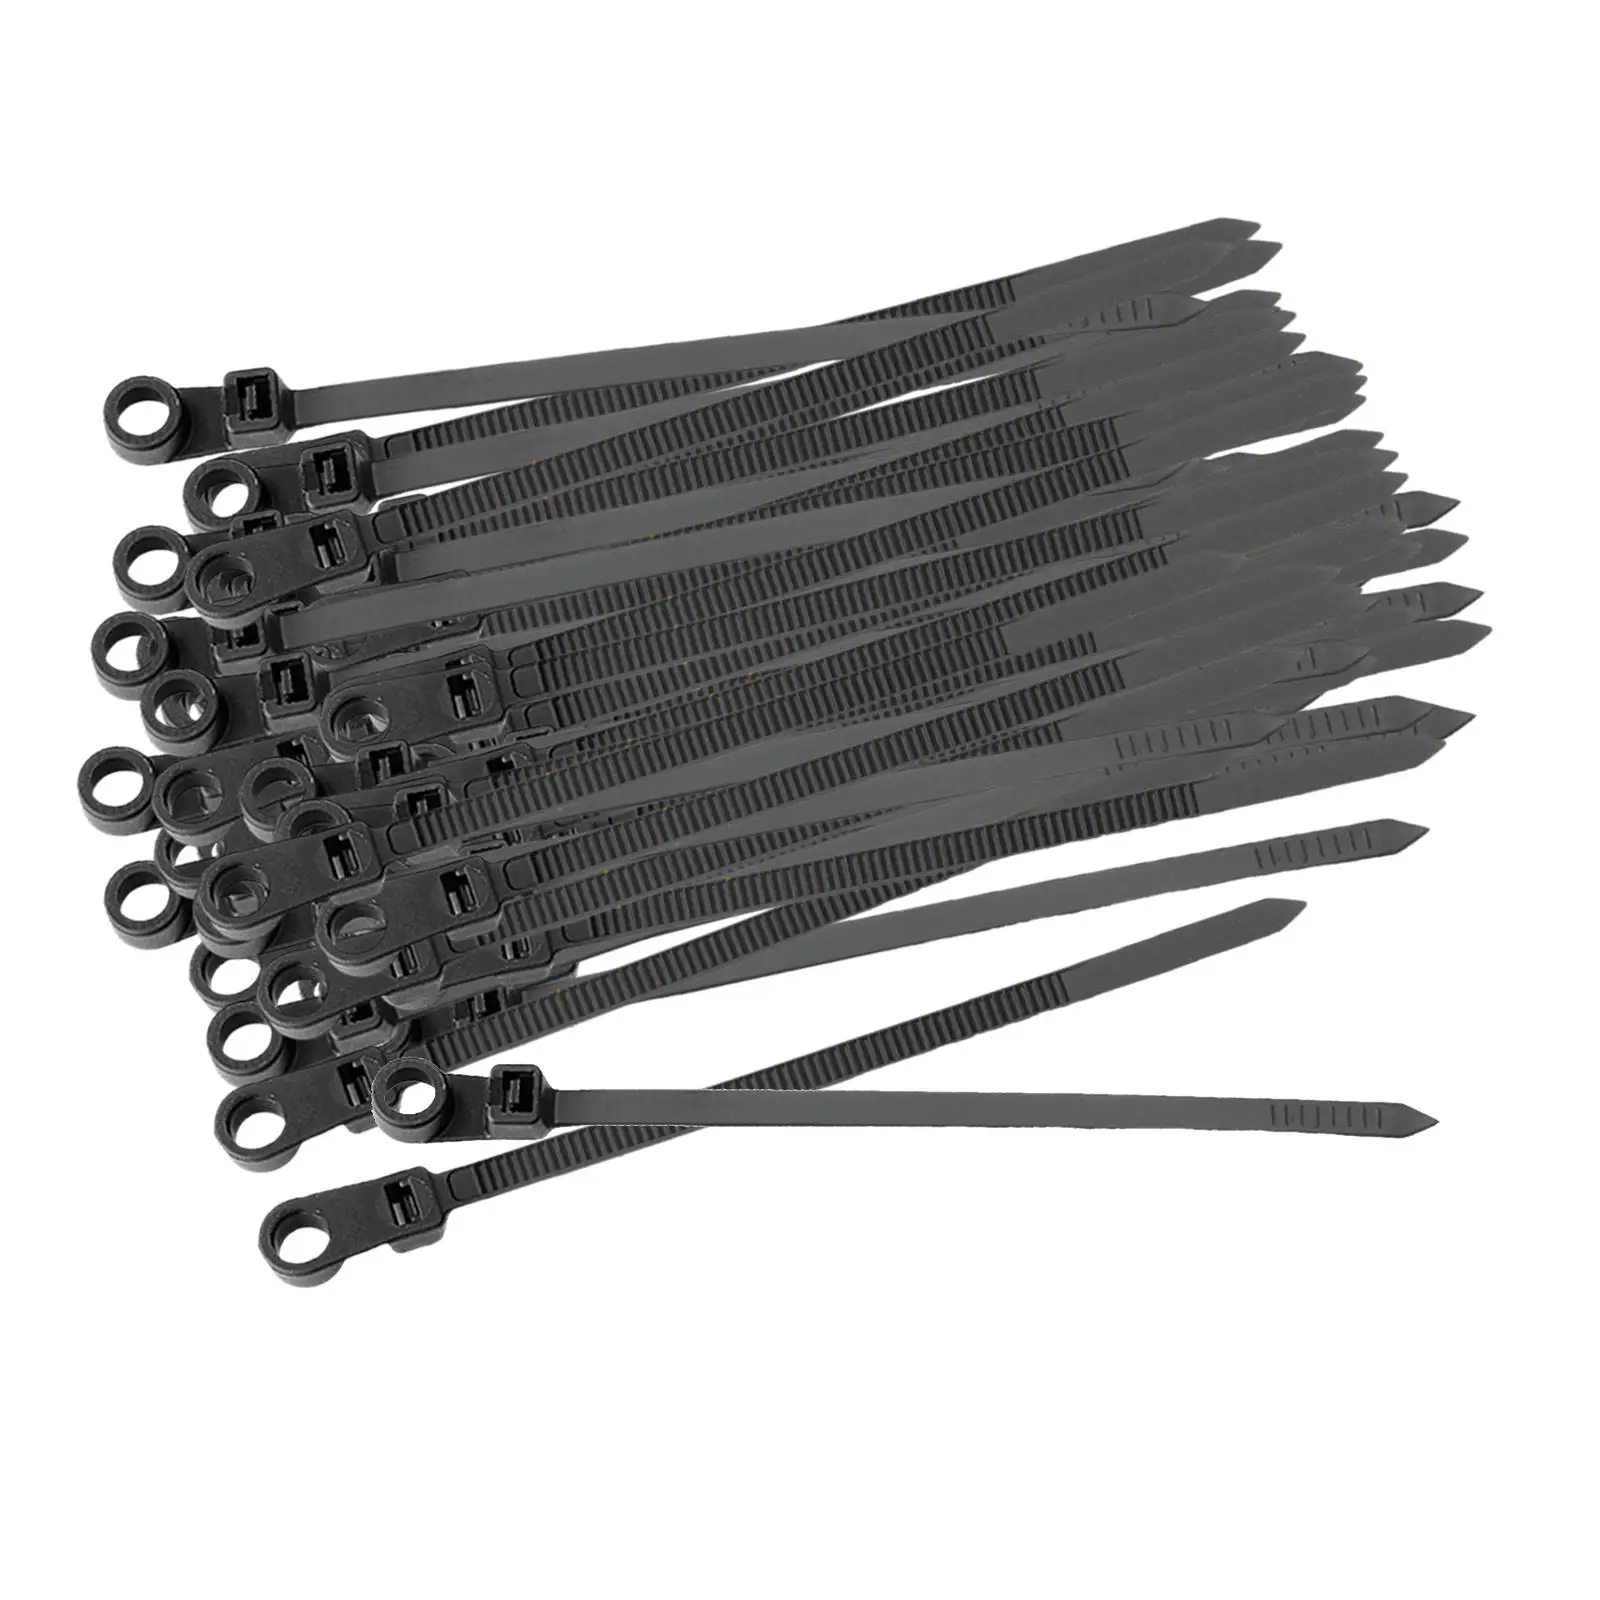 100 Pieces Nylon Cable Zips Wire Ties with Screw Hole Professional Nylon Zip Ties for Home Office Garden Trellis Garage Workshop